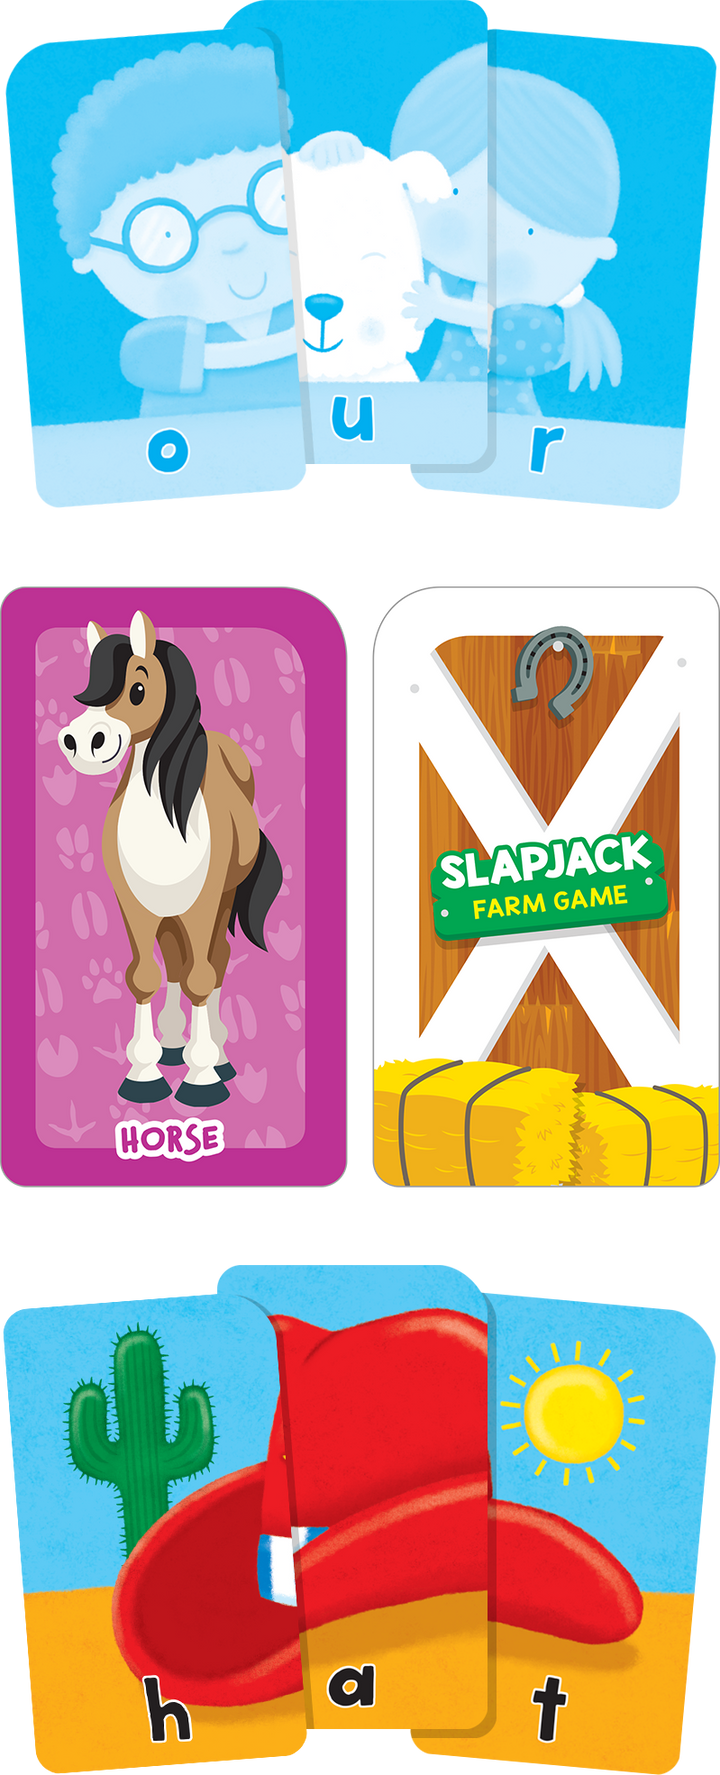 Sharpen thinking and problem-solving with this Get Ready Game Cards Three-Letter Words & Slapjack Farm 2-Pack.